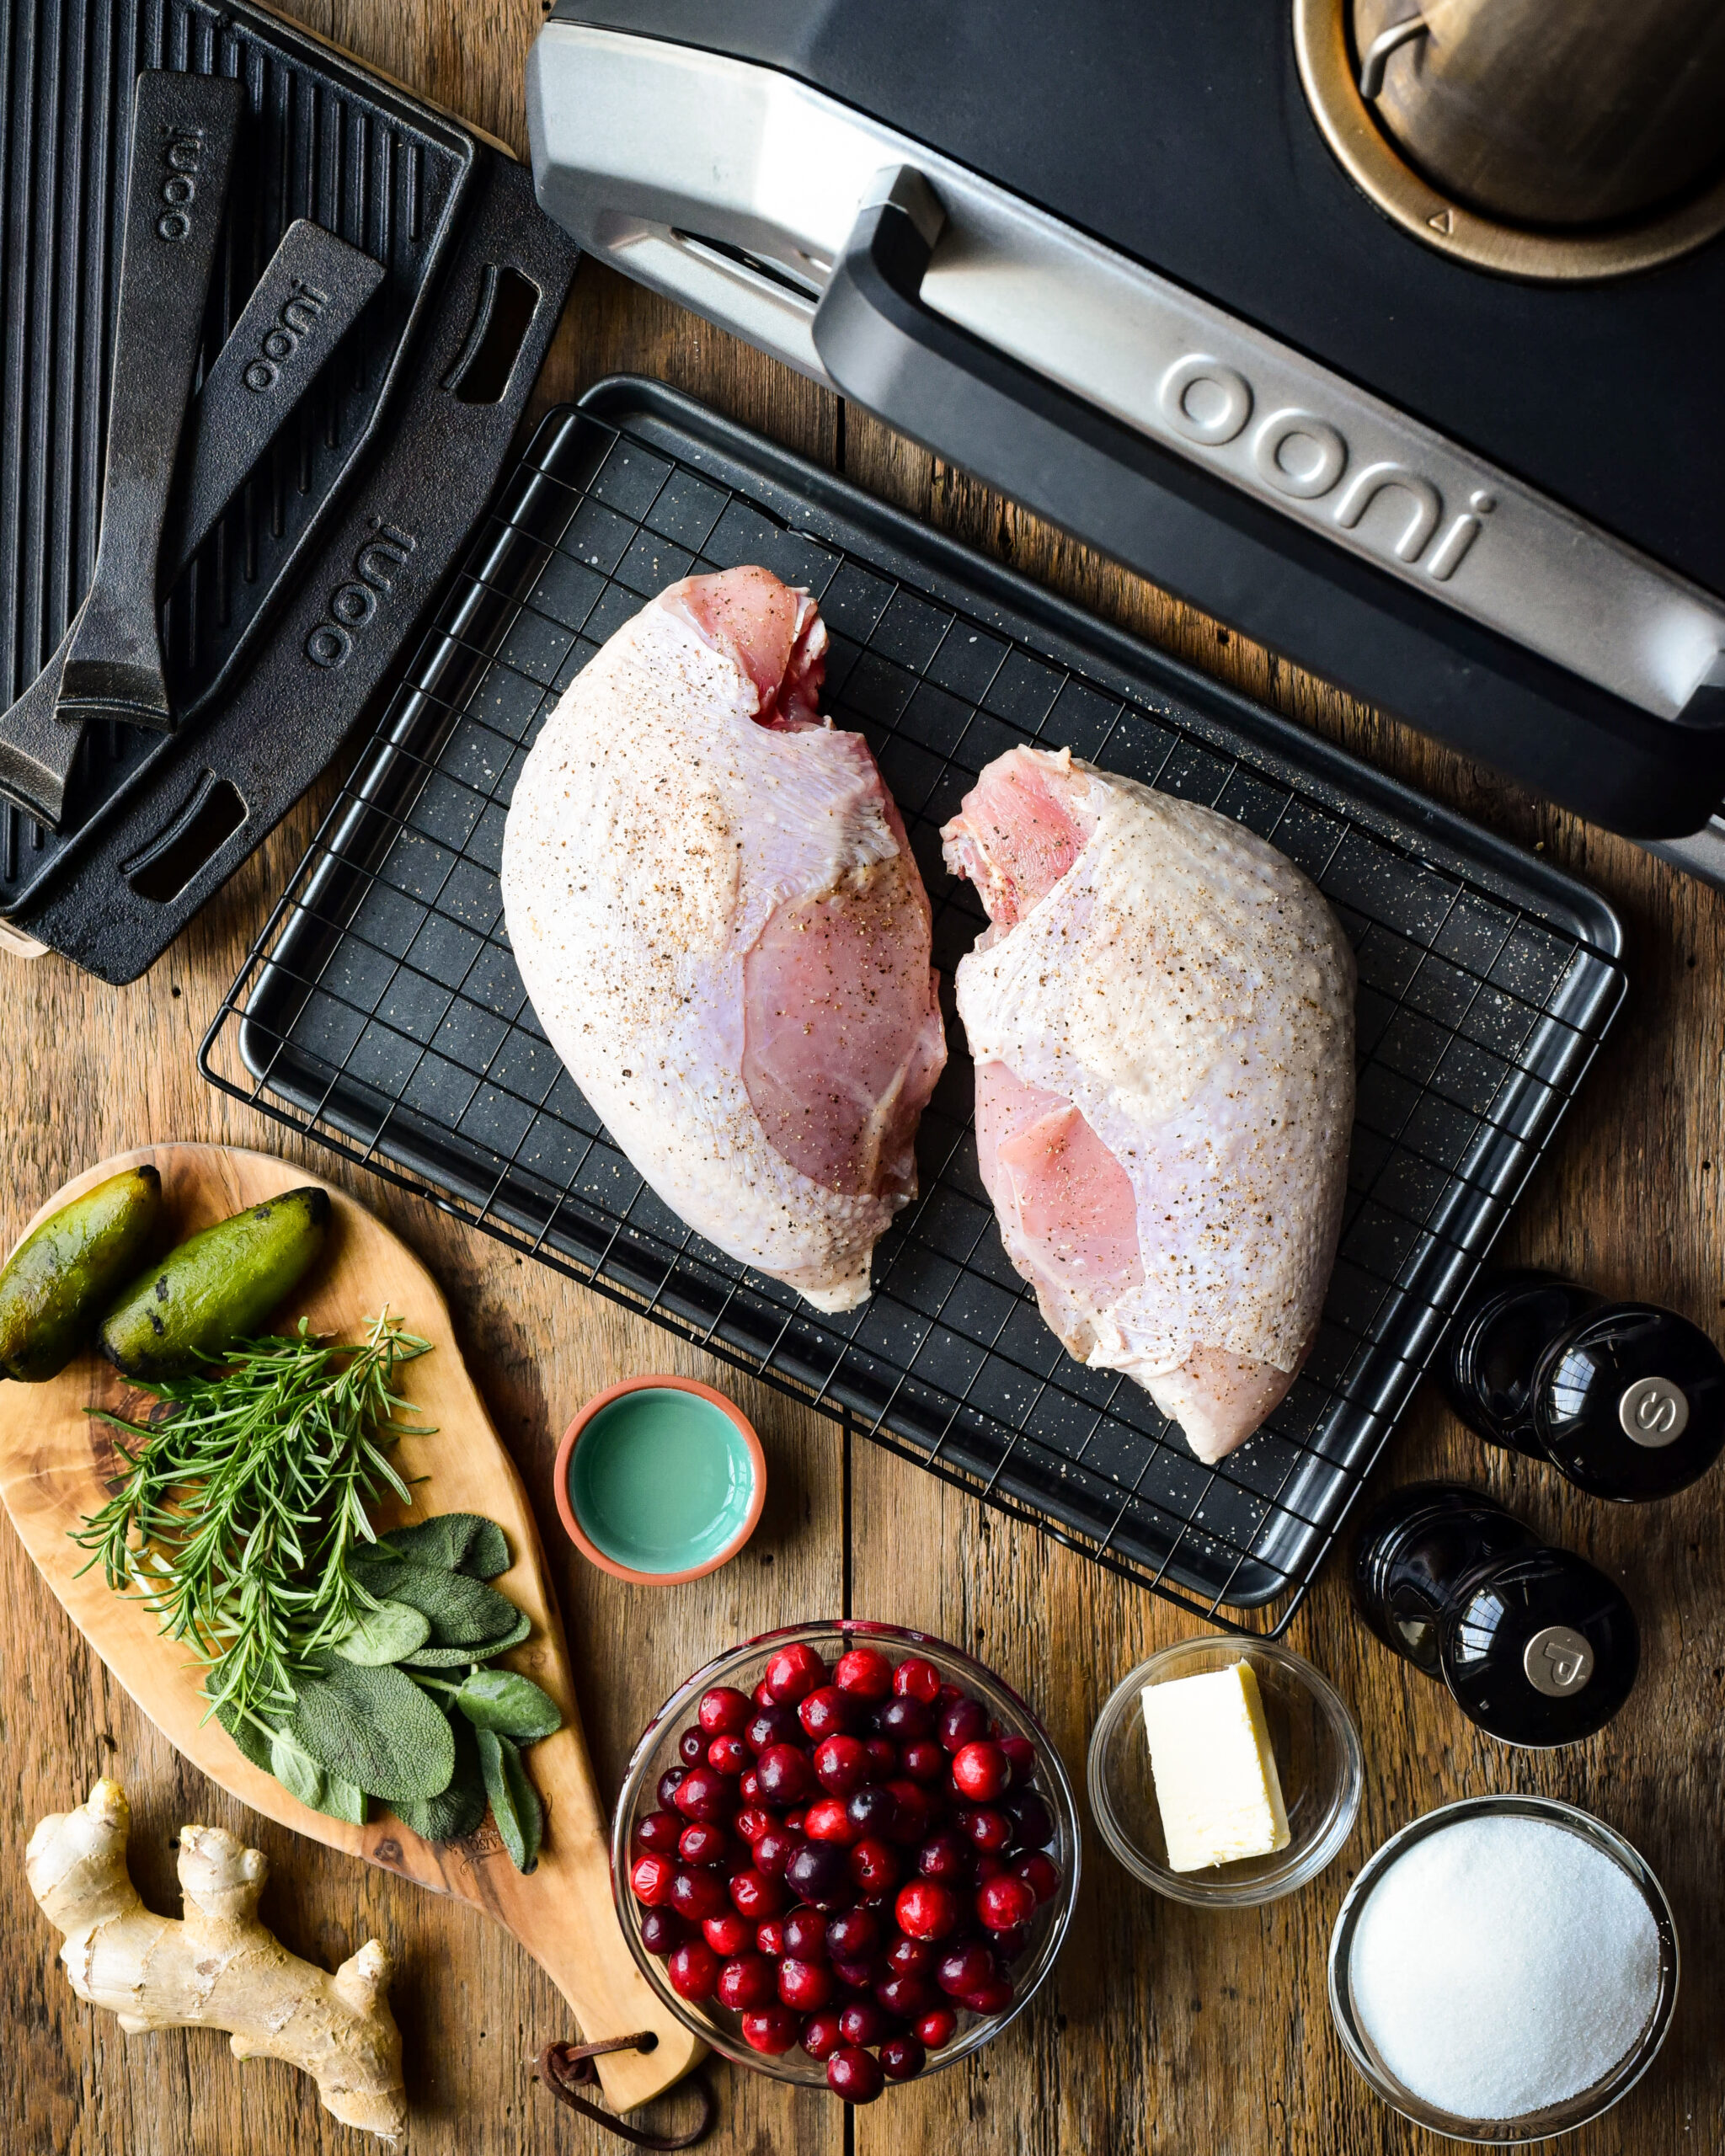 Wood-fired Turkey Breasts with Ginger-Jalapeño-Cranberry Sauce Ingredients layed out beside the Ooni Karu 16